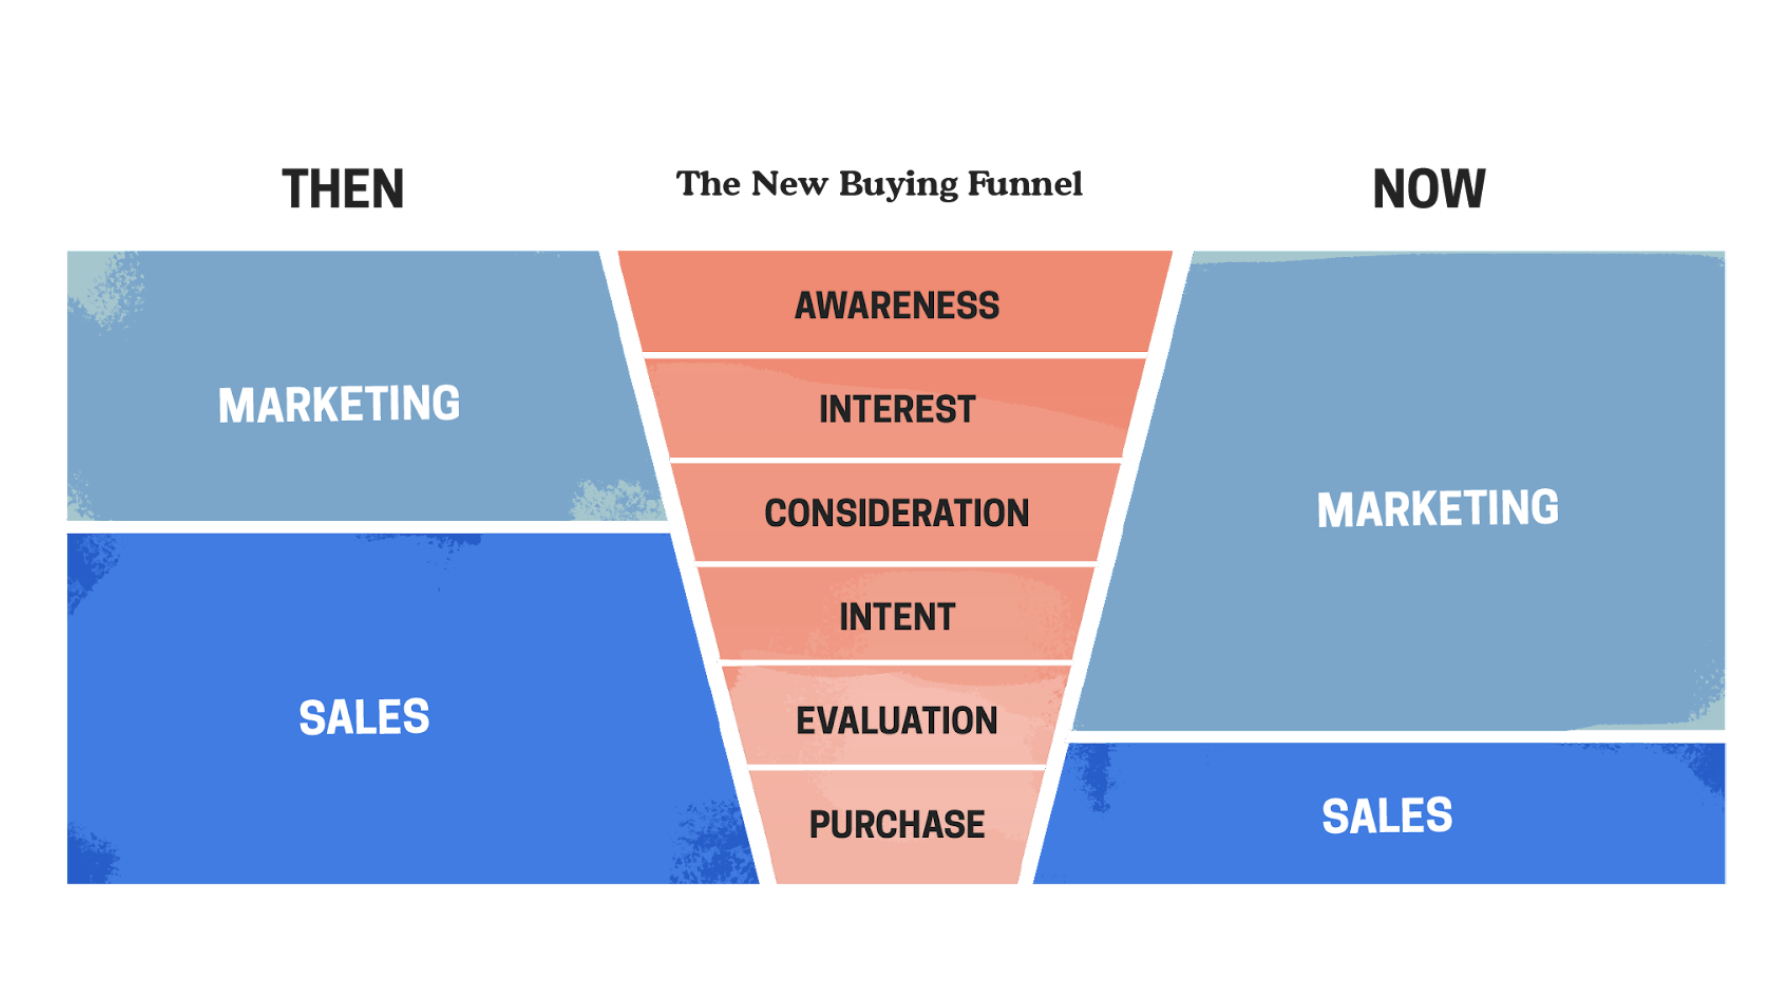 The New Buying Funnel